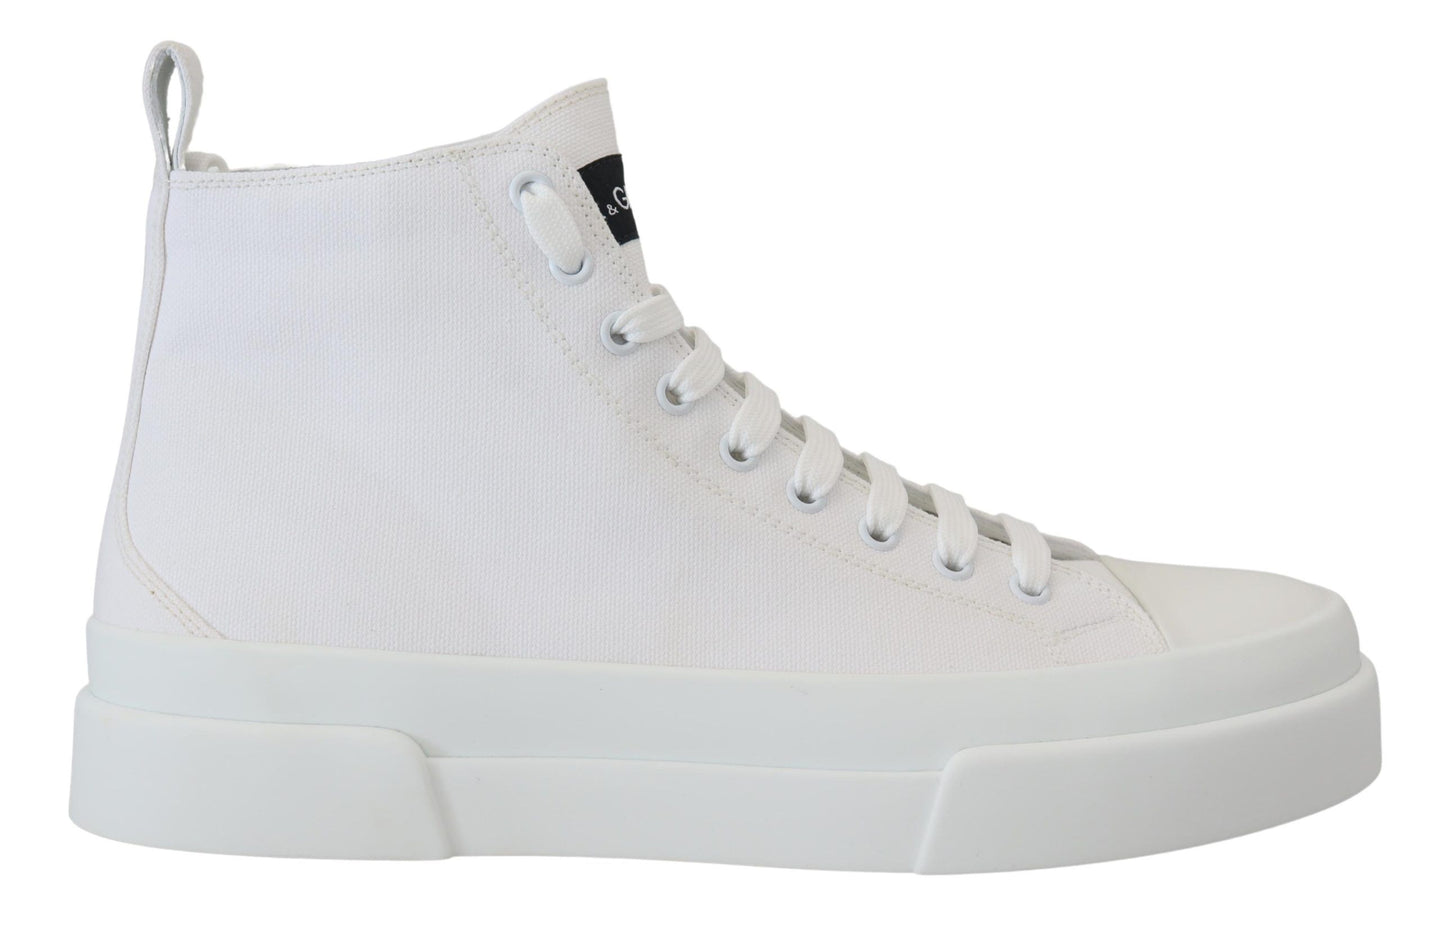 White Canvas Cotton High Tops Sneakers Shoes